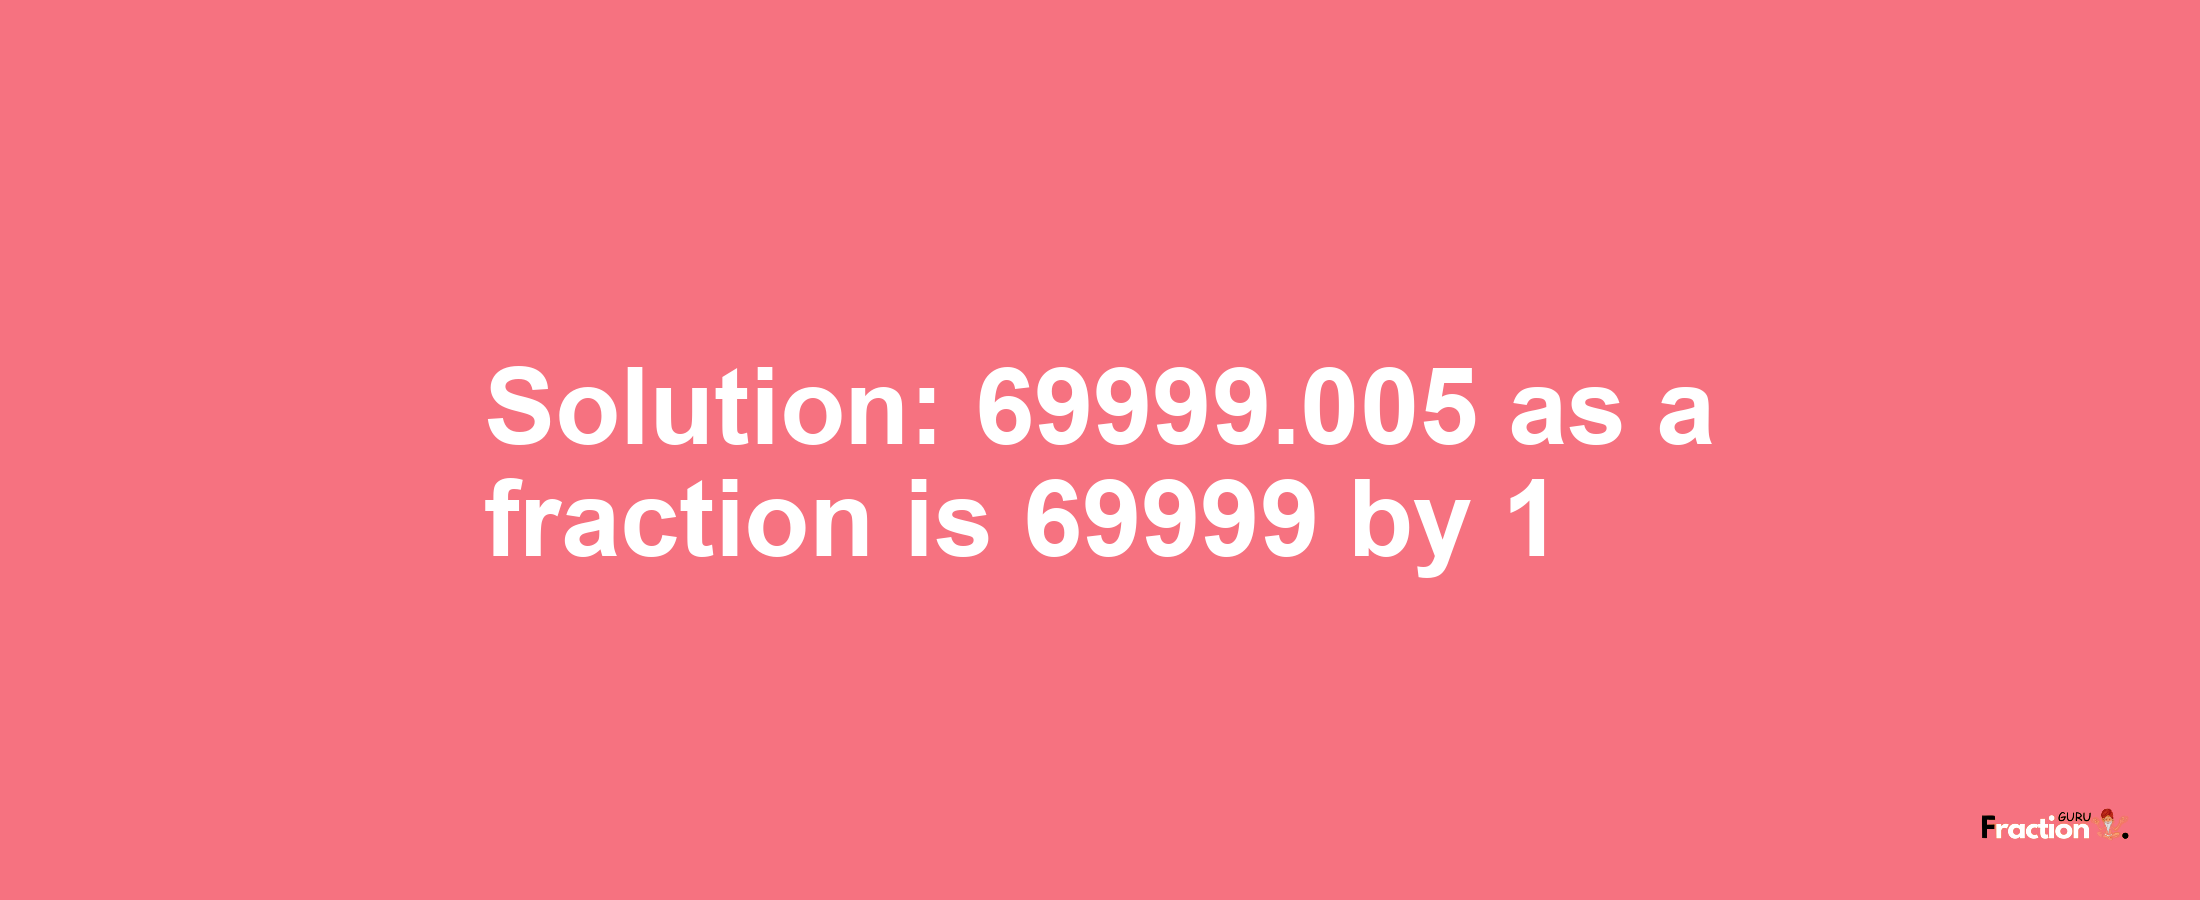 Solution:69999.005 as a fraction is 69999/1